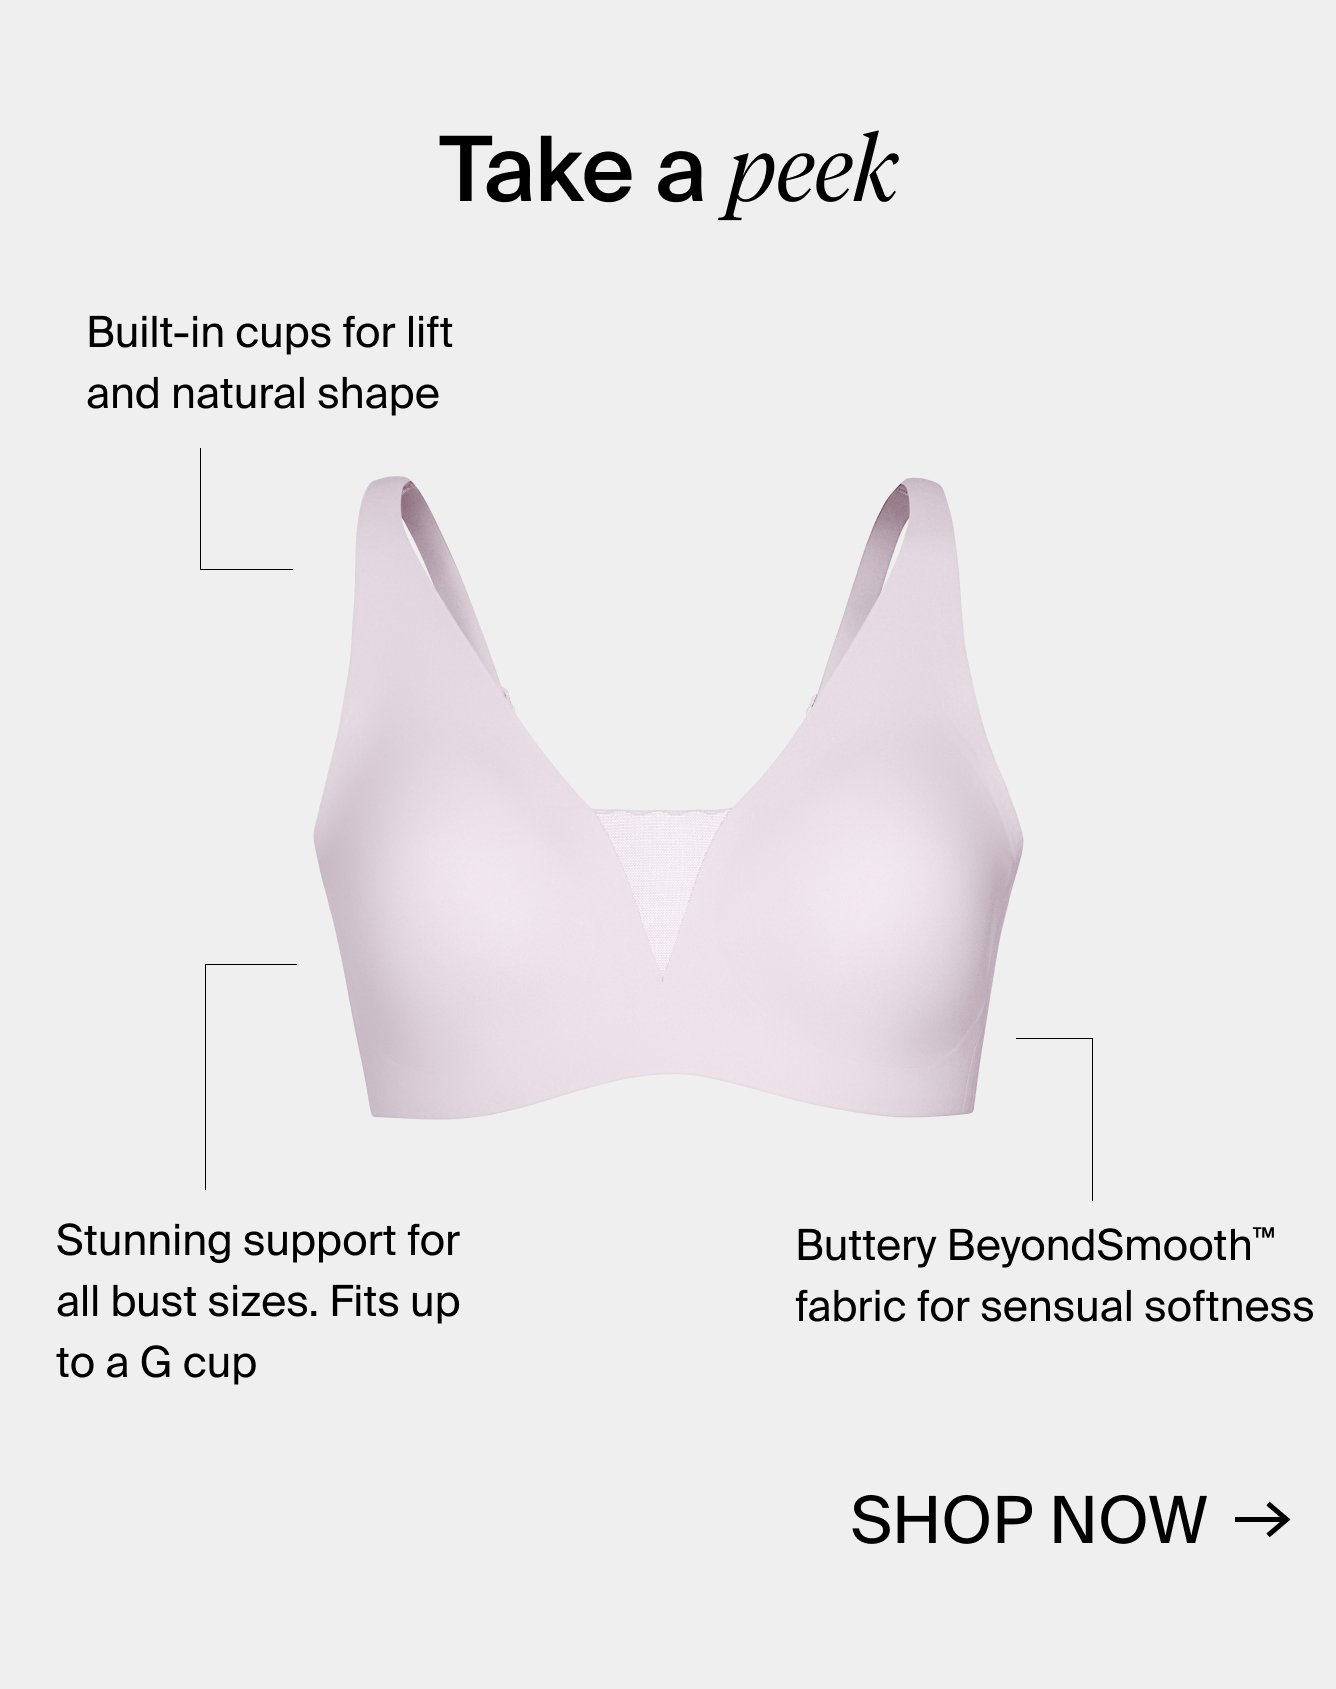 Take a peek. Built-in cups for lift and natural shape. Stunning support for all sizes. Fits up to a G cup. Butter BeyondSmooth™ fabric for sensual softness. Shop Now.